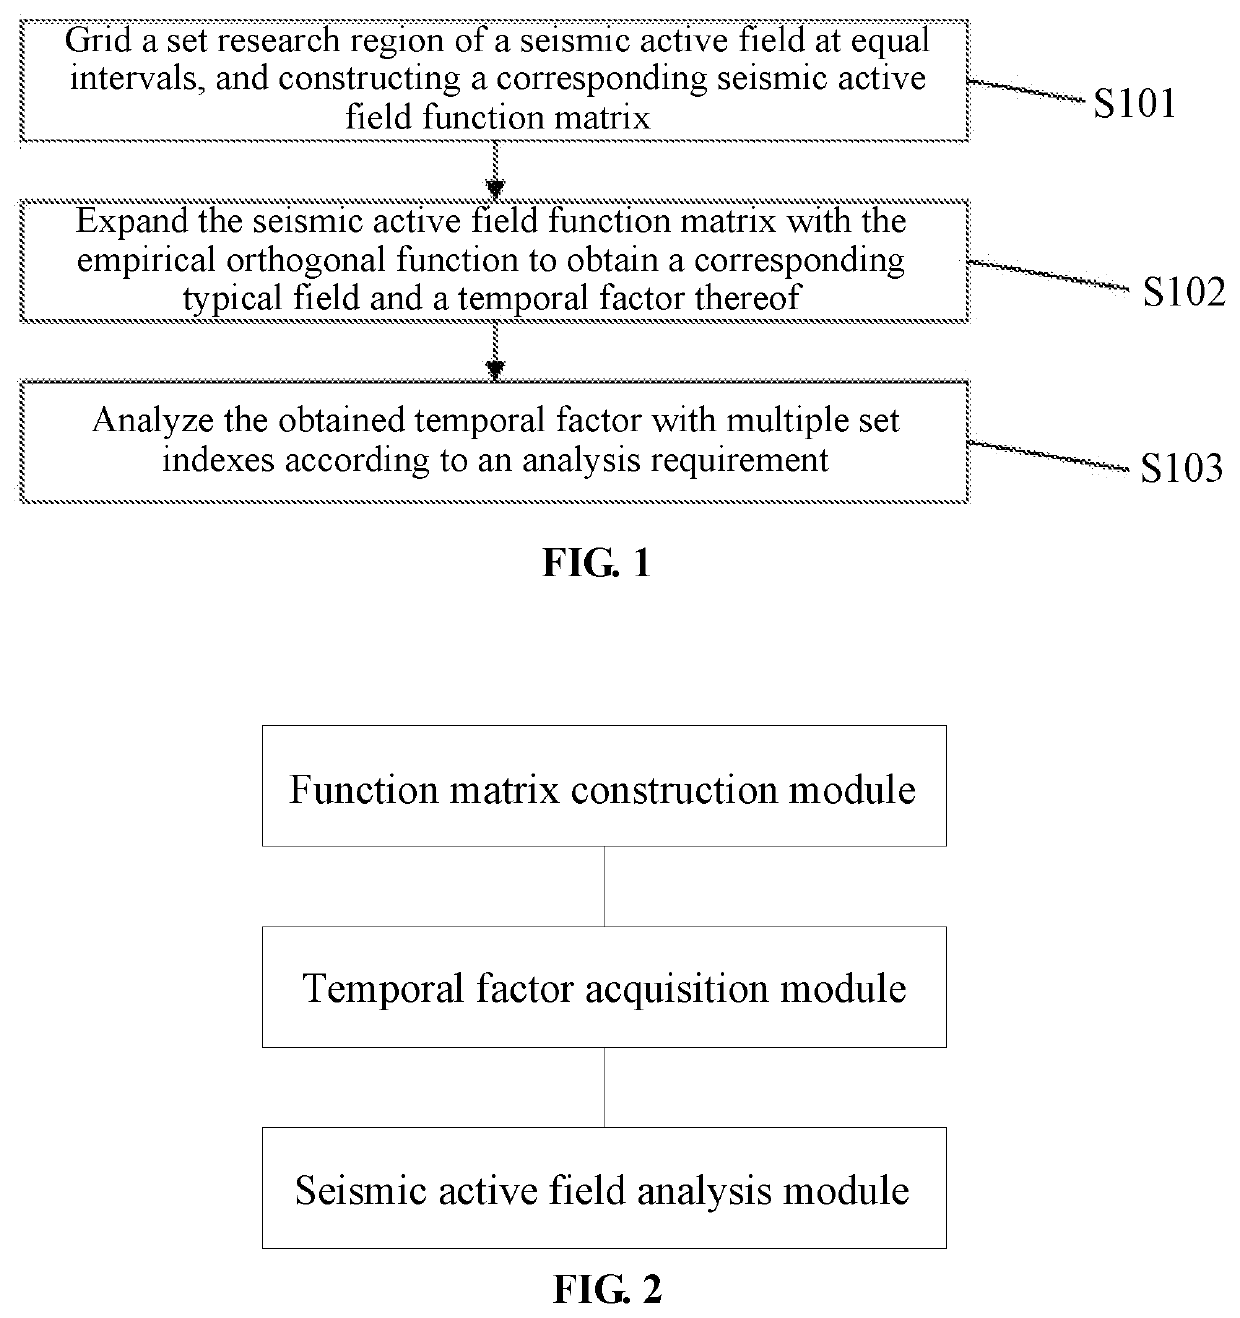 Method and system for analyzing seismic active field based on expansion of empirical orthogonal function